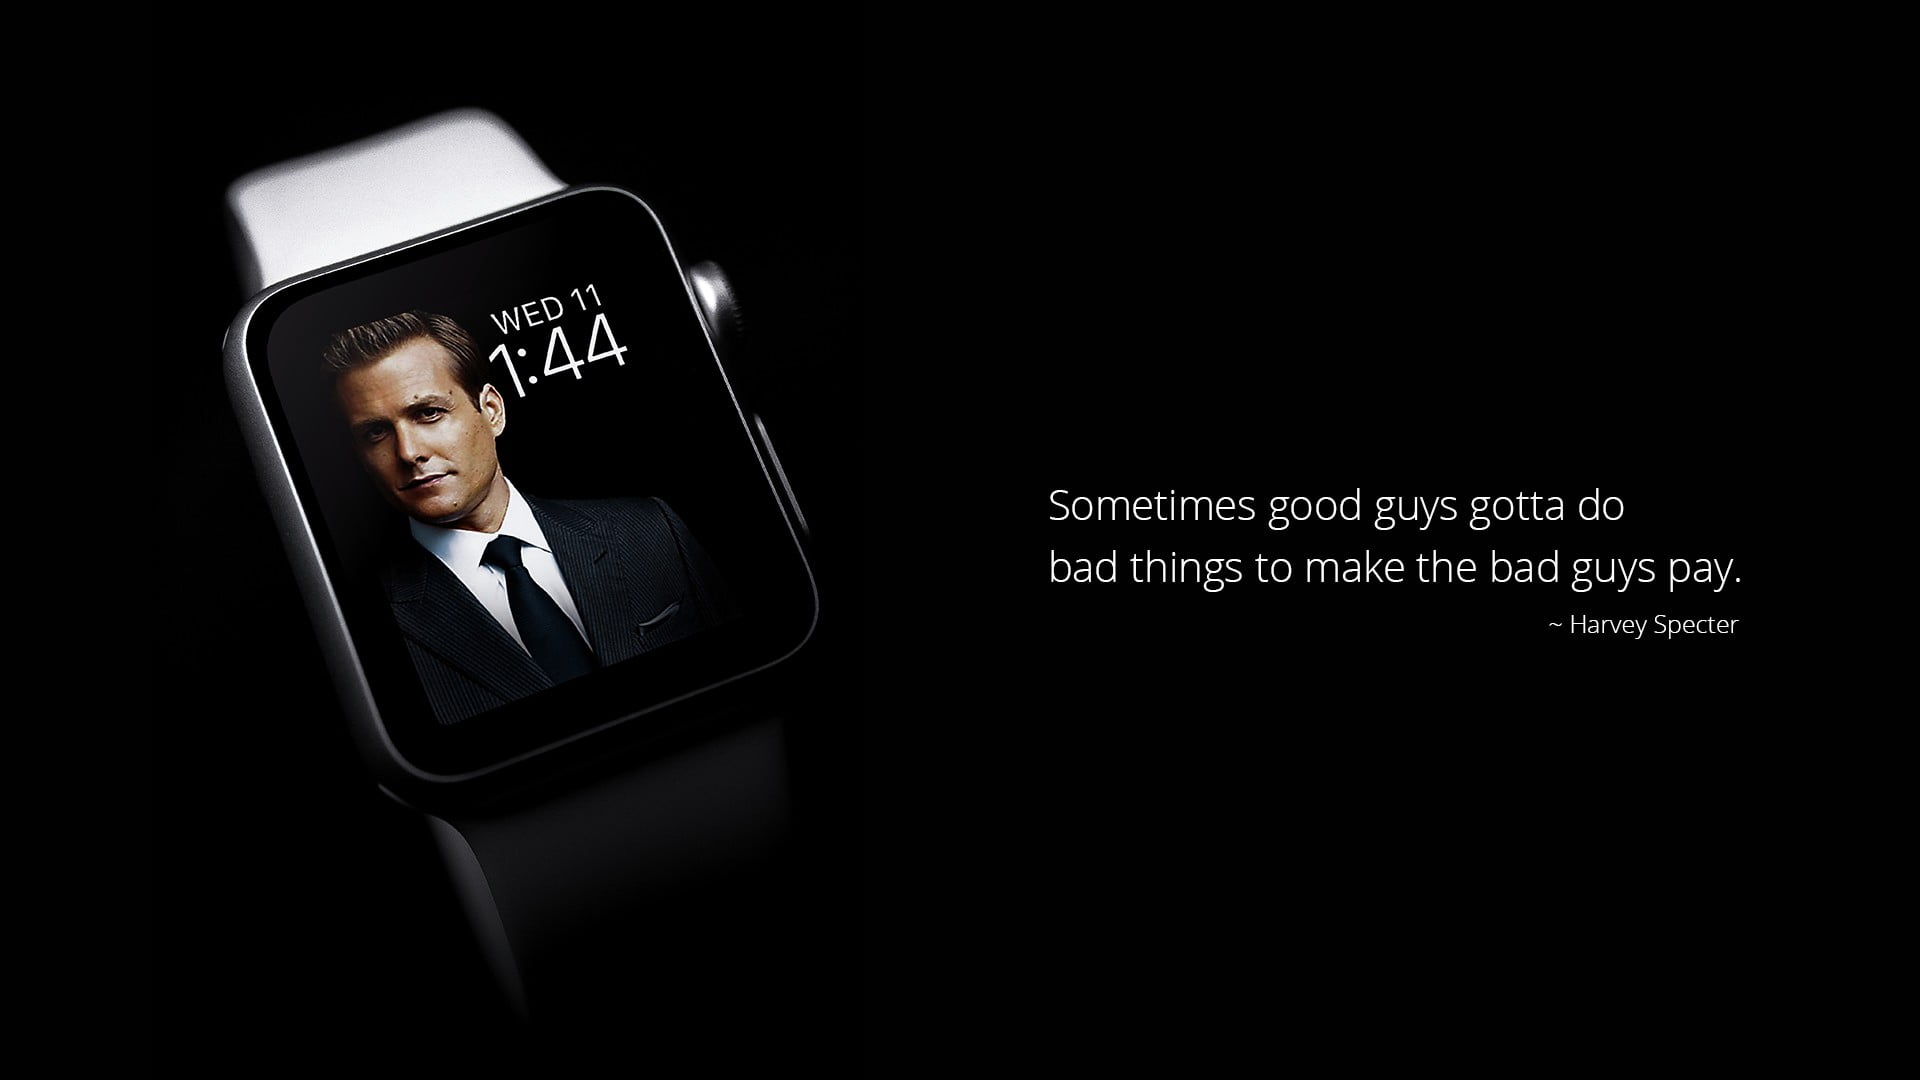 space grey Apple Watch with grey Sports Band and text overlay, Apple Watch, Harvey Specter, Gabriel Macht  , quote